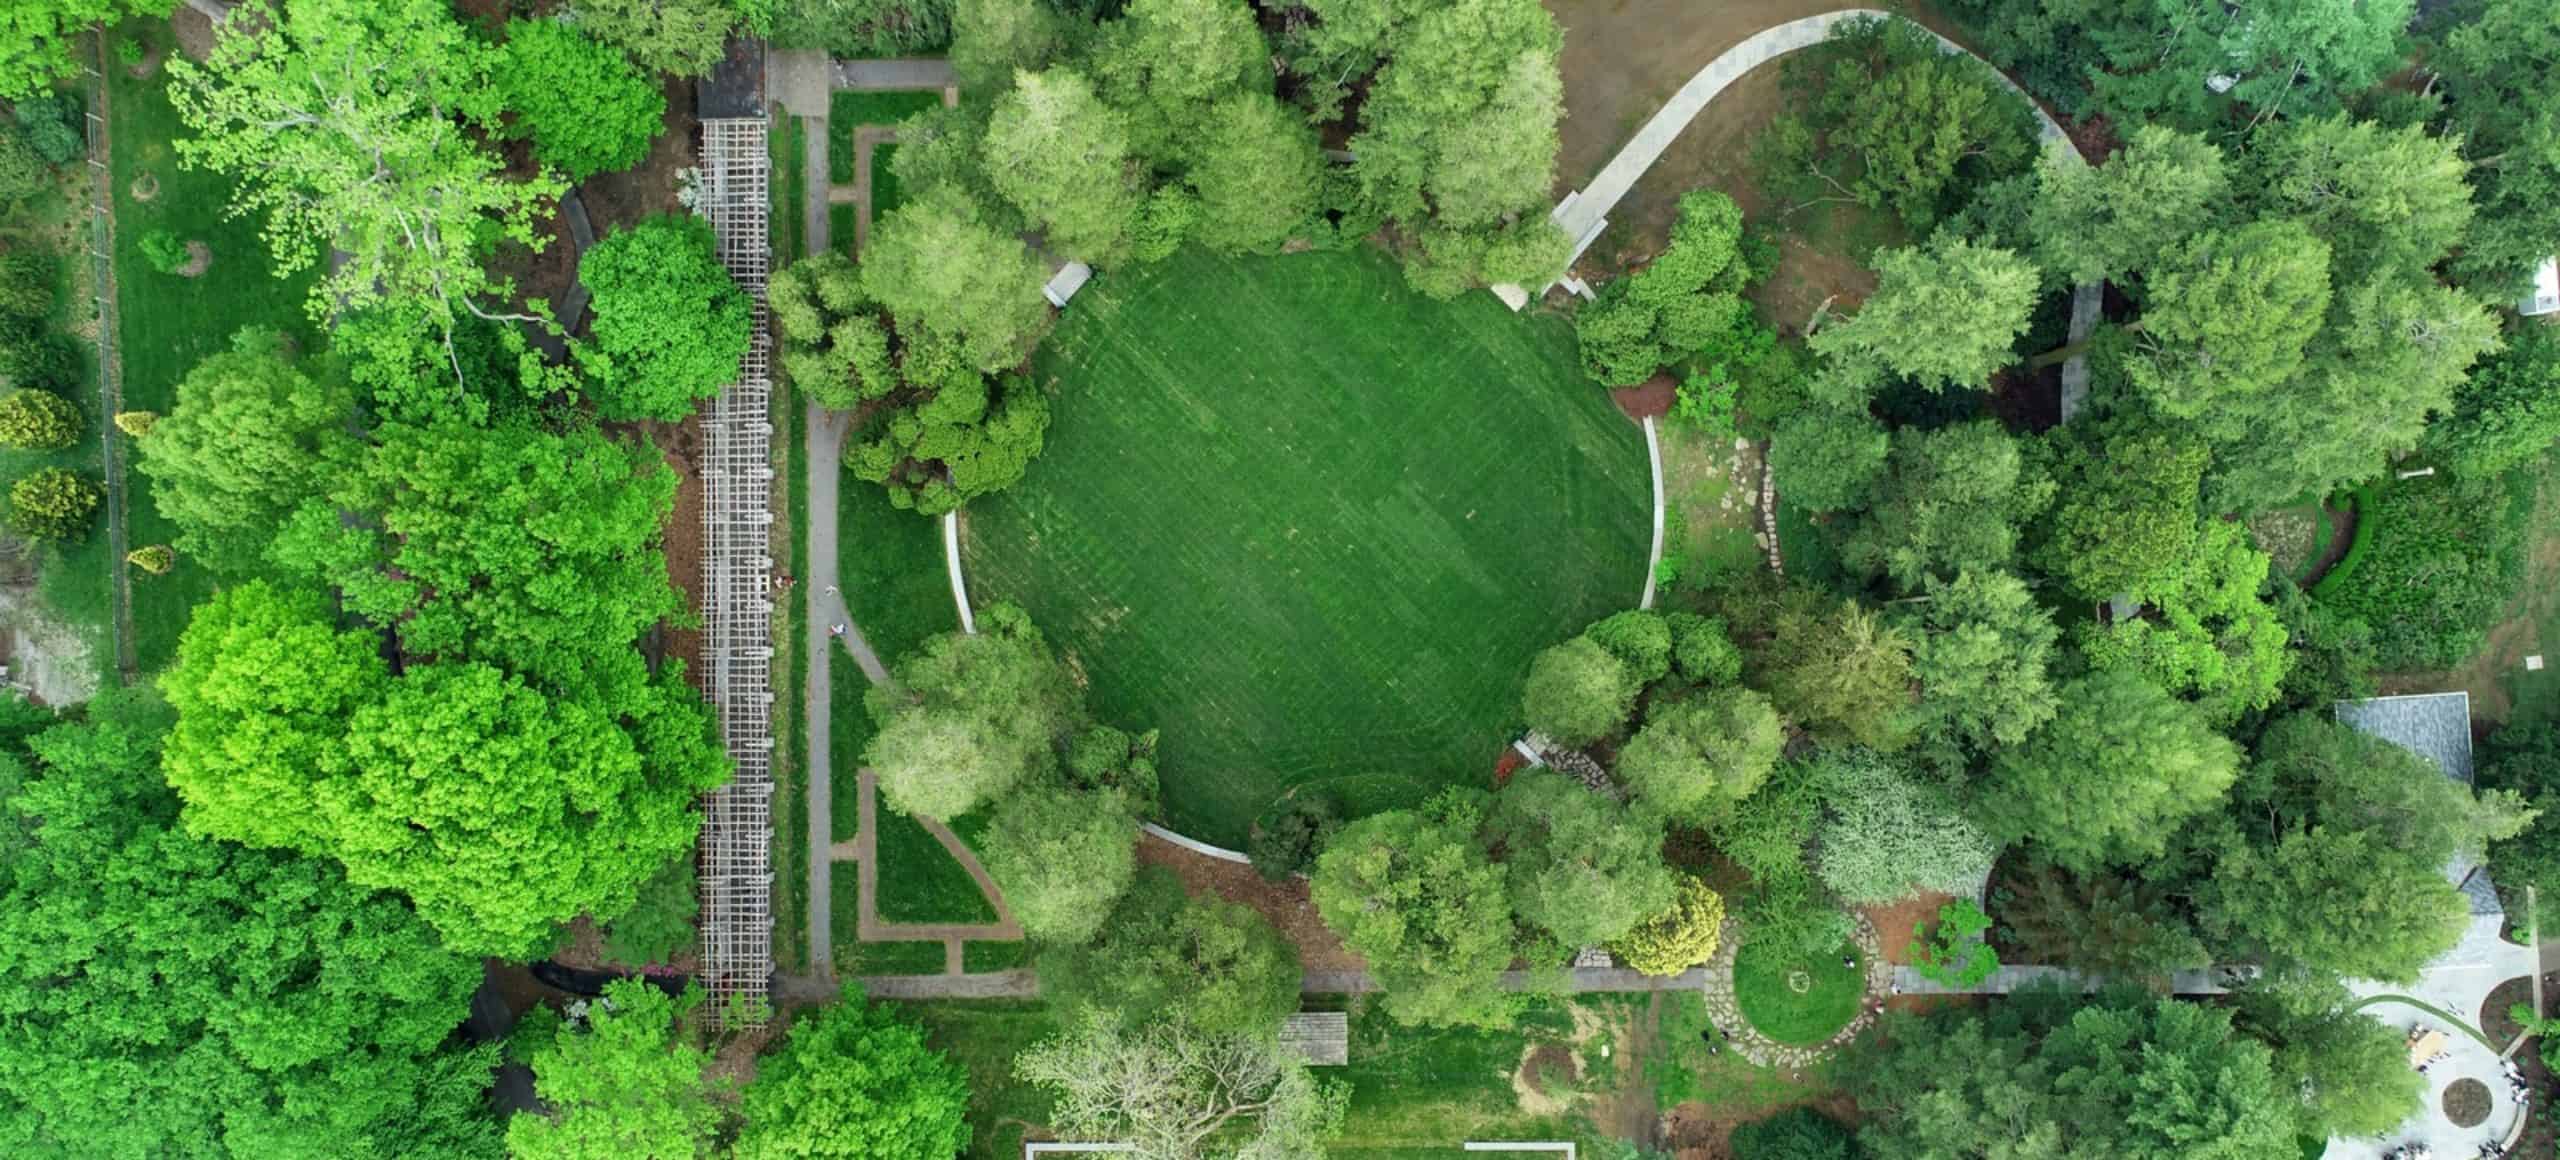 Drone shot of a green garden with interesting shapes and green colors